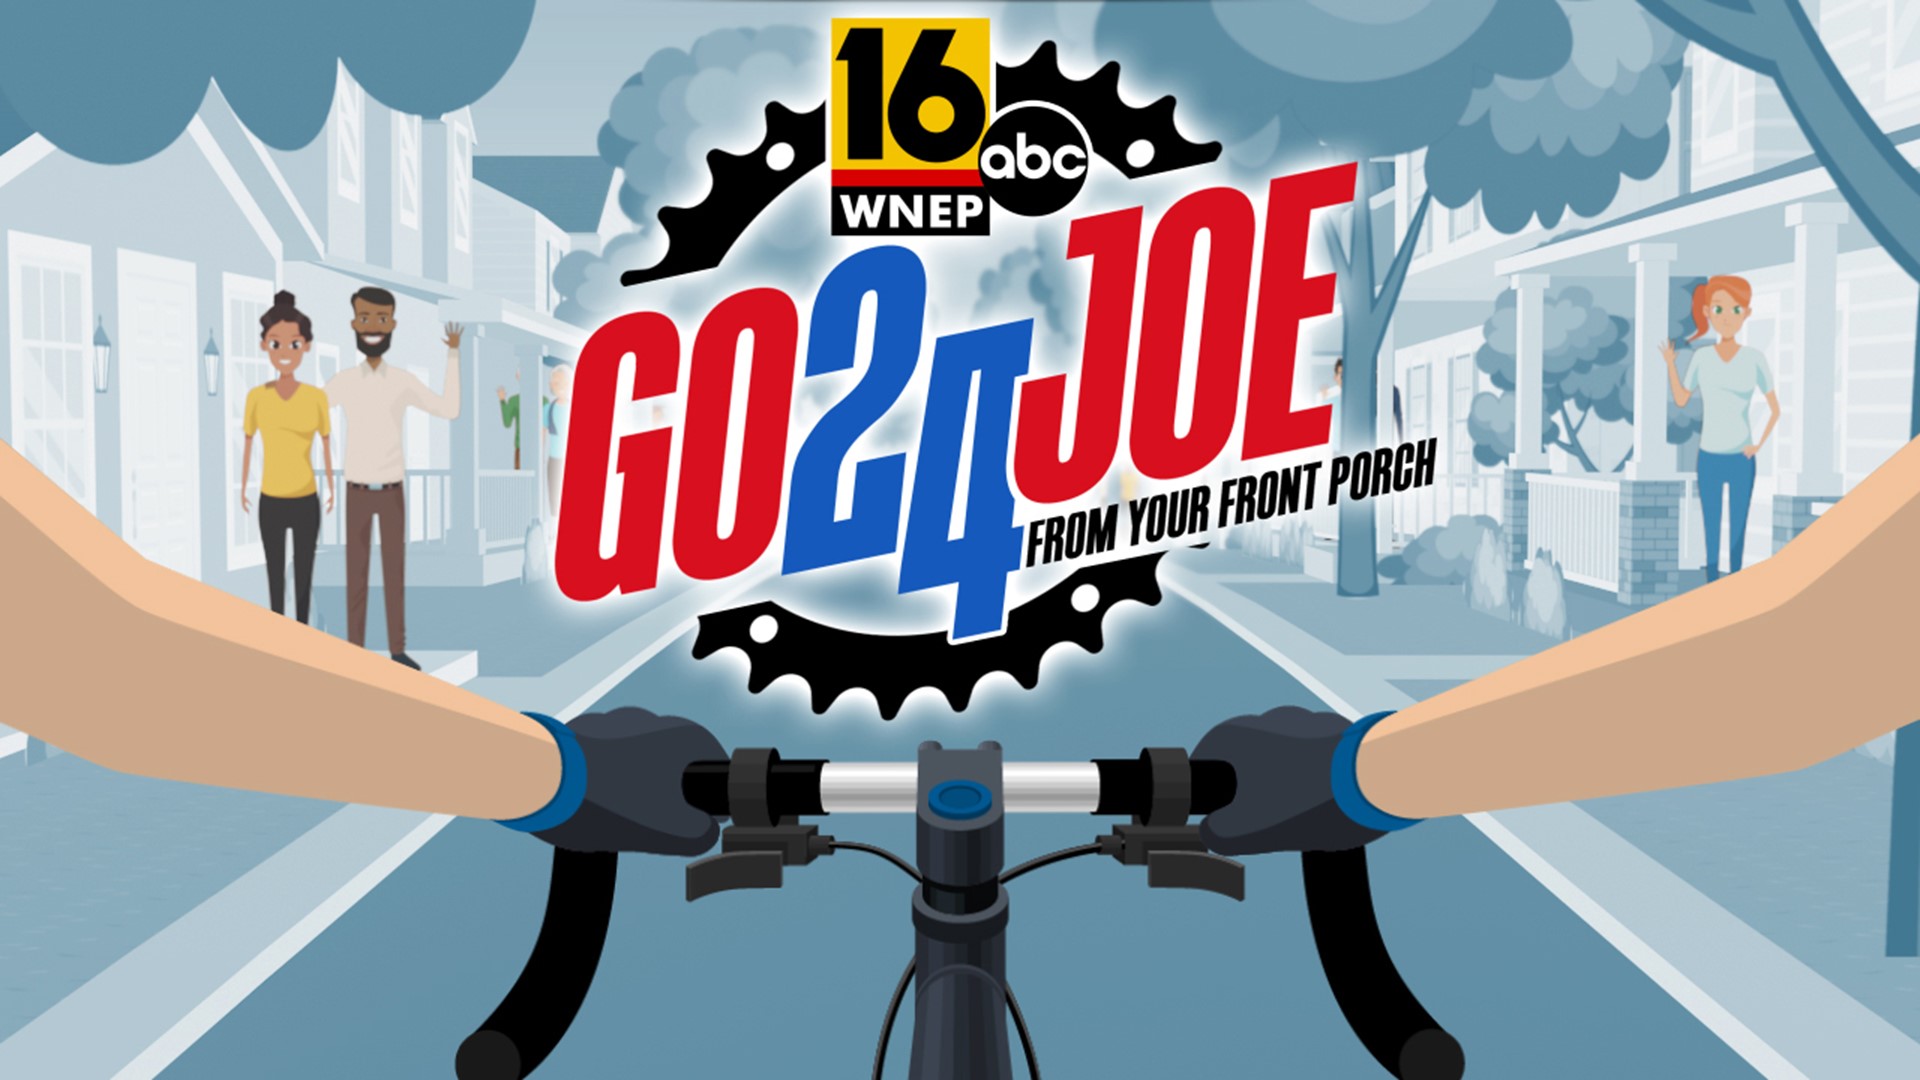 Go Joe 24 Learn more about the bike ride and how to donate